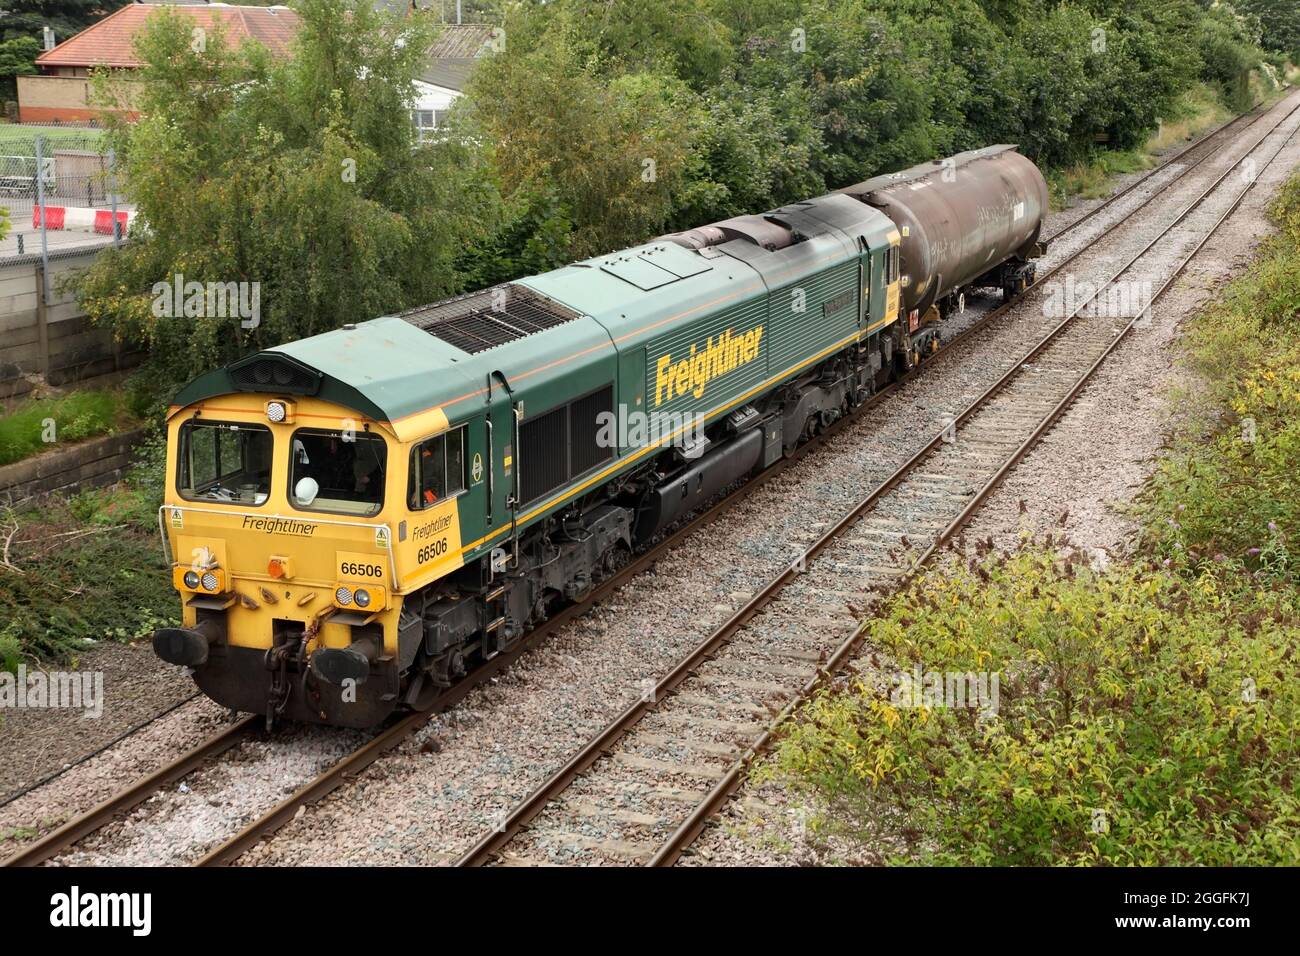 Freightliner Class 66 loco 66506 'Crewe Regeneration' hauling the one-wagon 0914 Ipswich to Lindsey Oil Refinery service through Scunthorpe: 31/8/21. Stock Photo